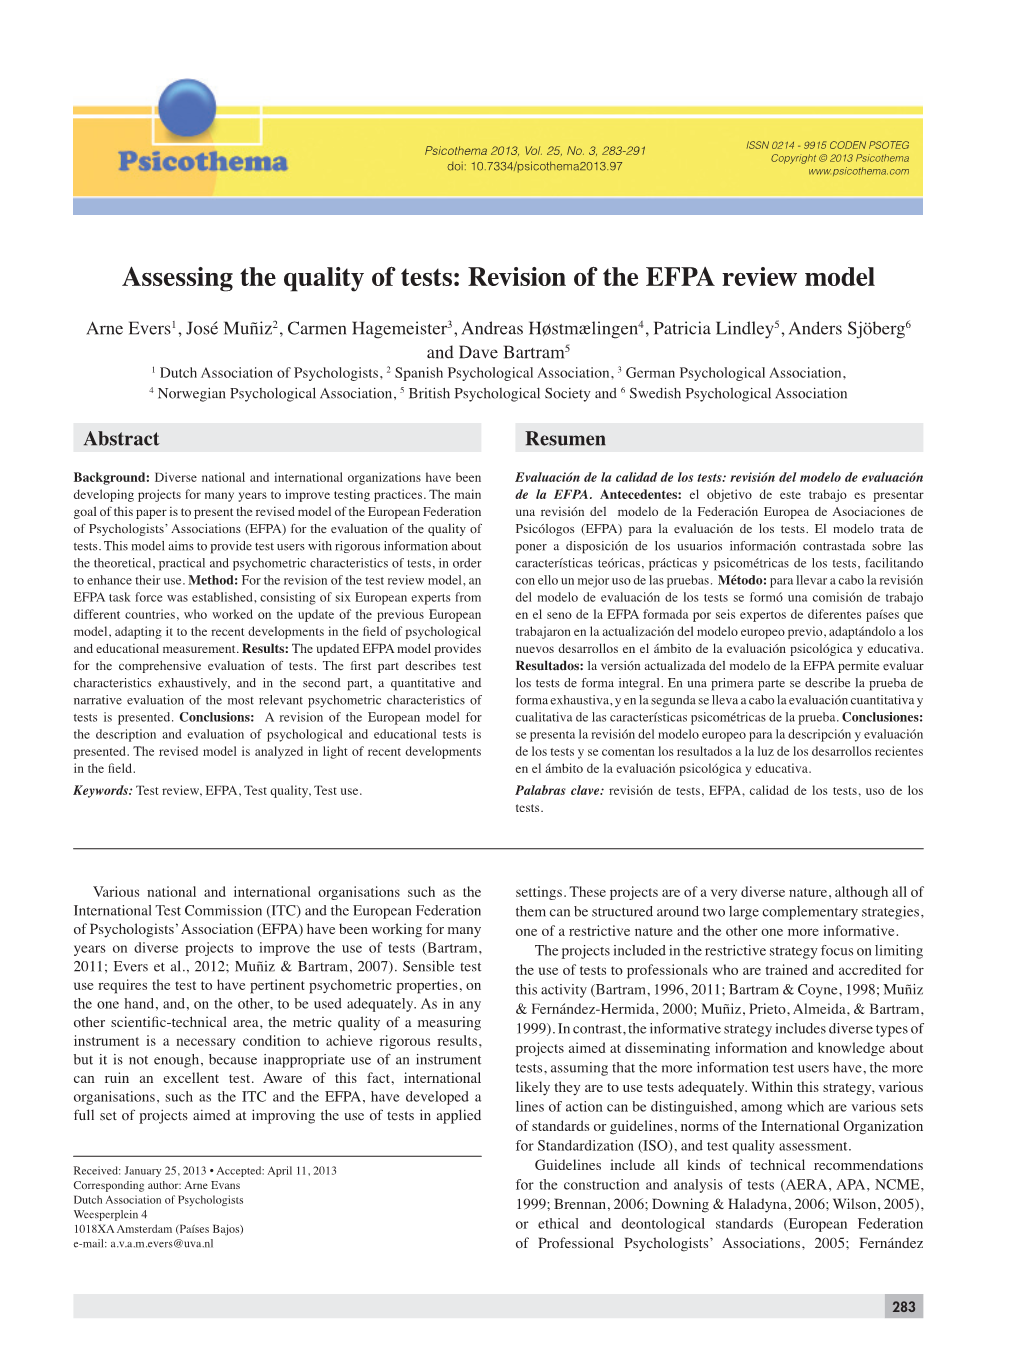 Assessing the Quality of Tests: Revision of the EFPA Review Model